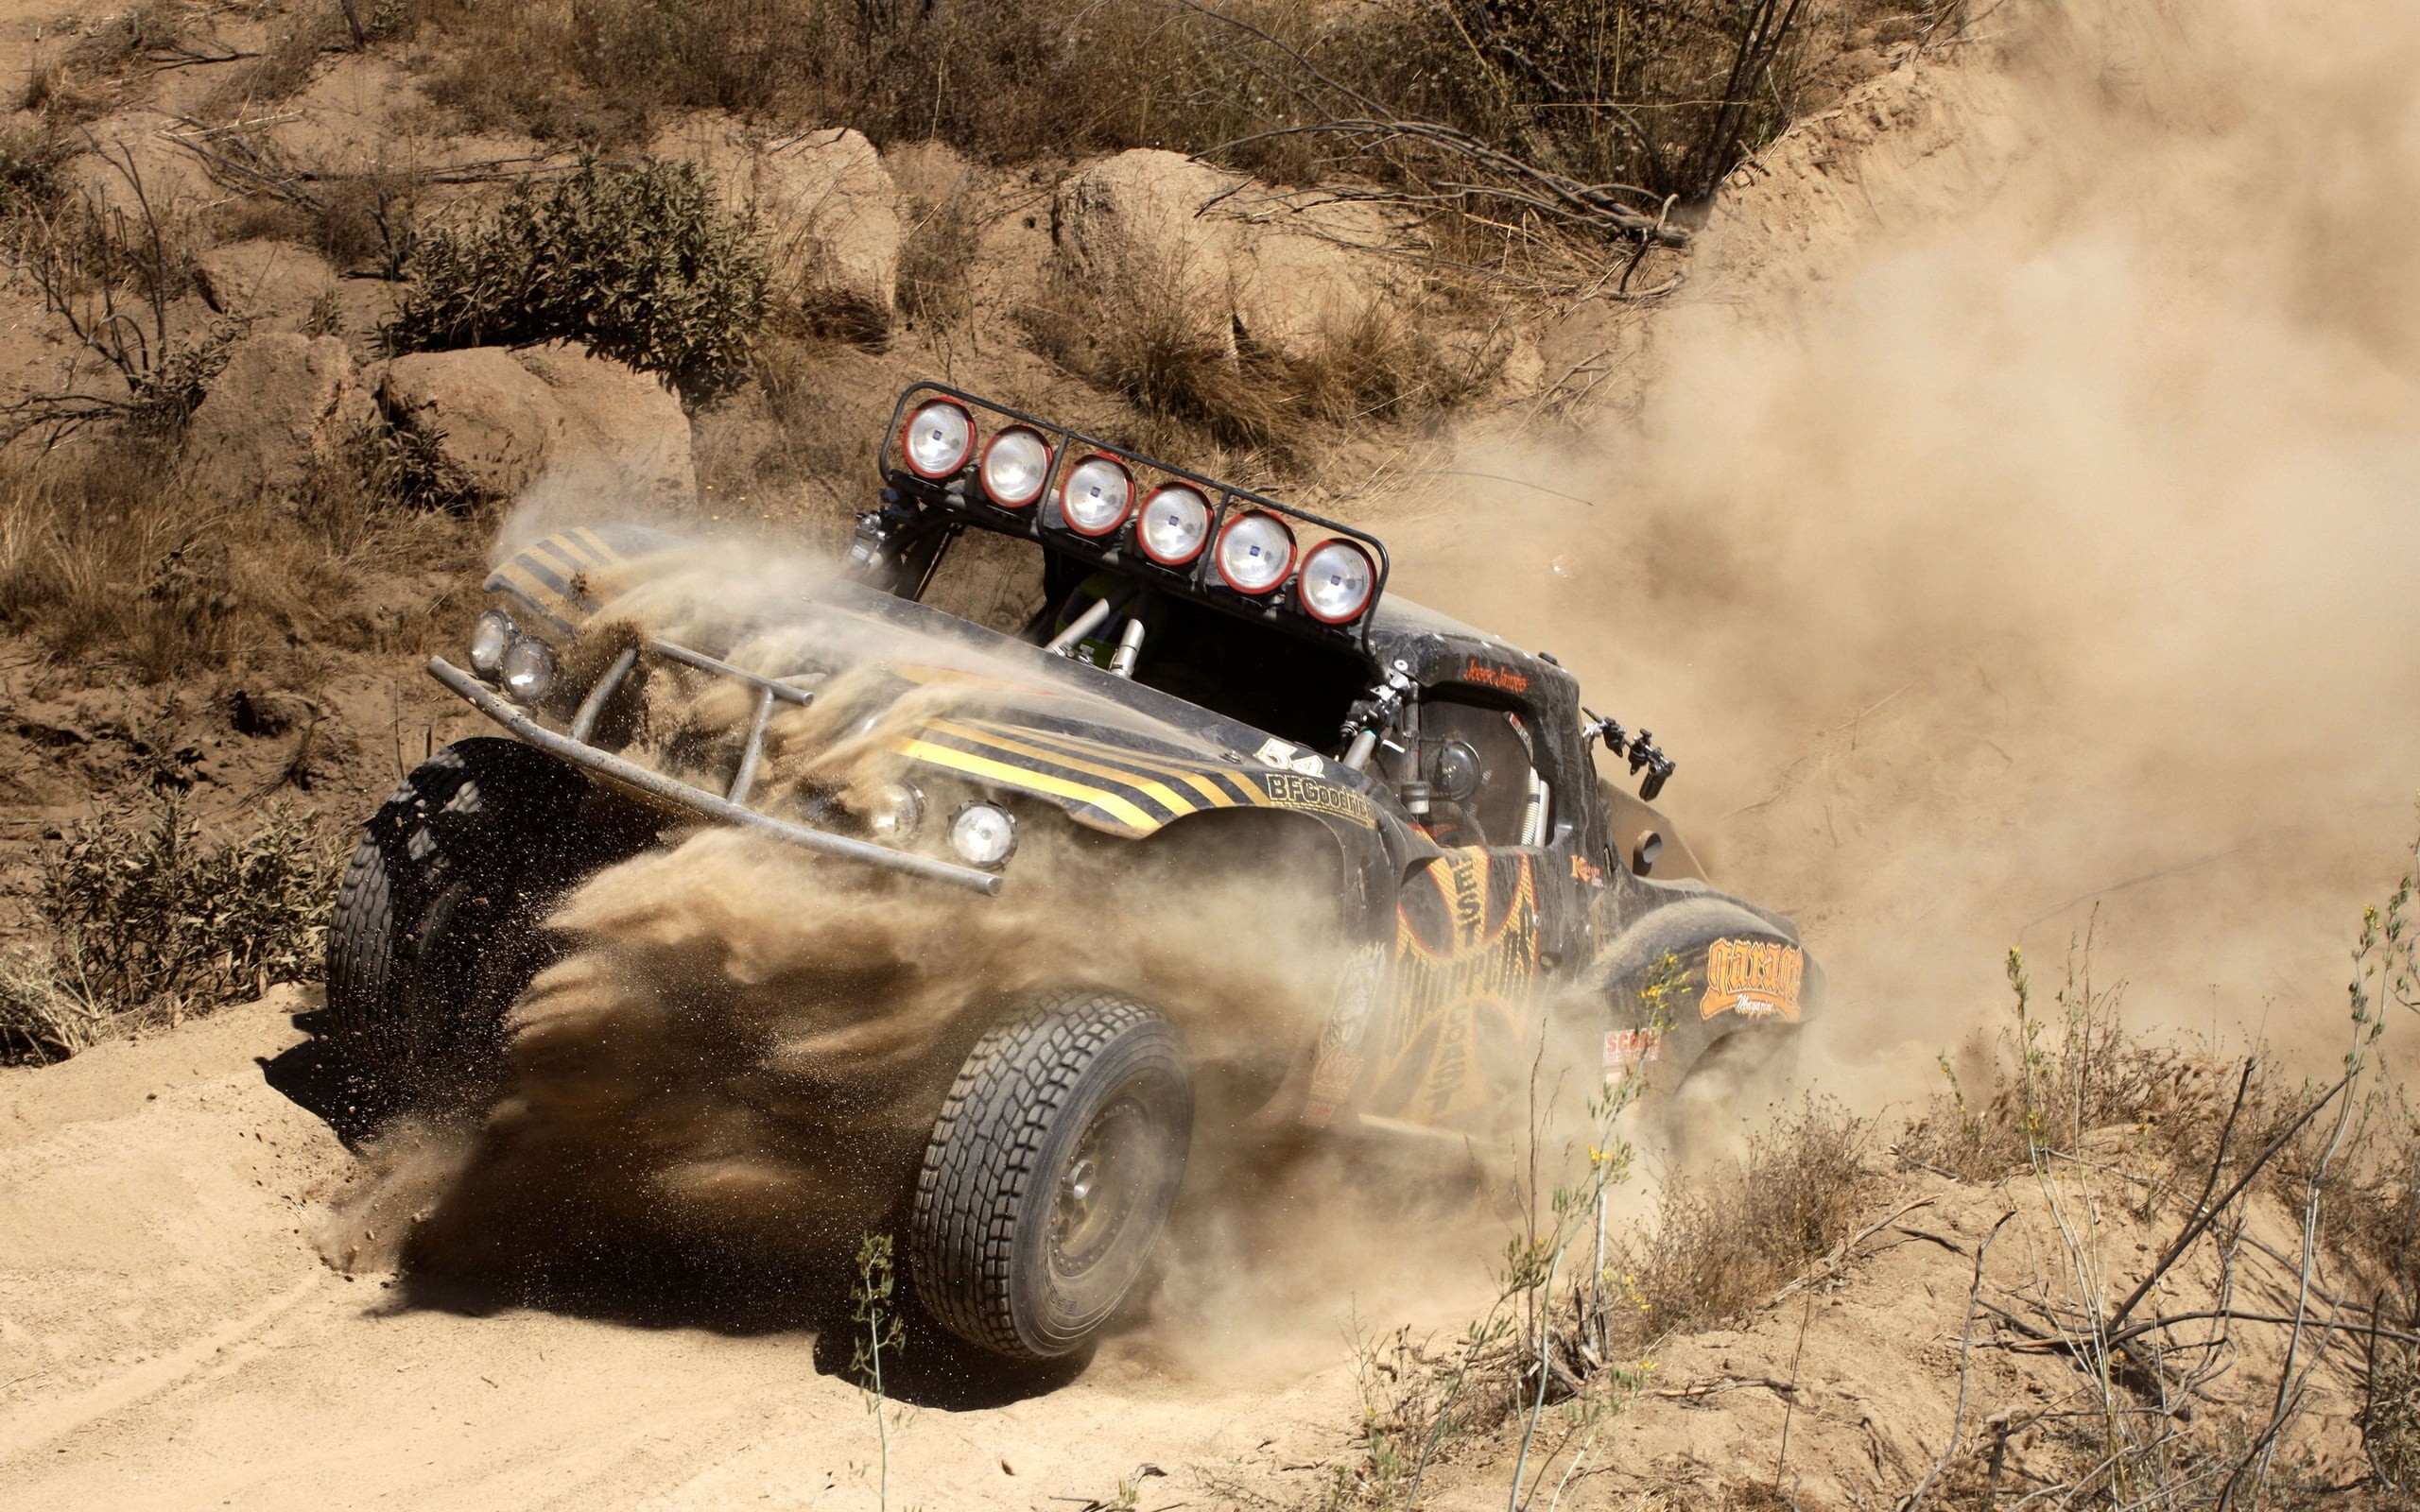 Off-road Driving: Off-roading events, Advanced four-wheel-drive technology, Abu Dhabi Desert Challenge. 2560x1600 HD Wallpaper.